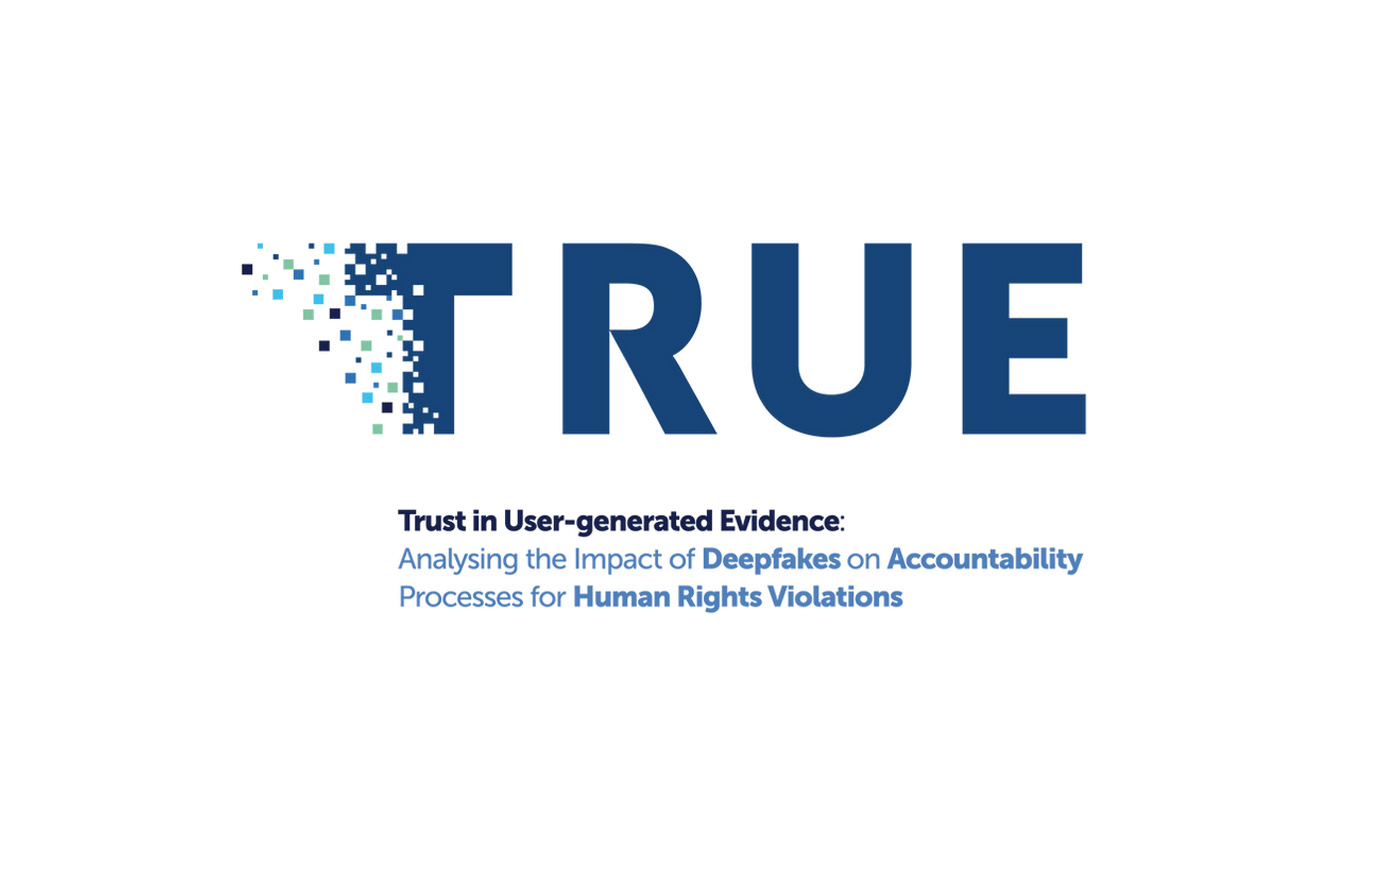 Trust in User-generated Evidence (TRUE) Project Launches